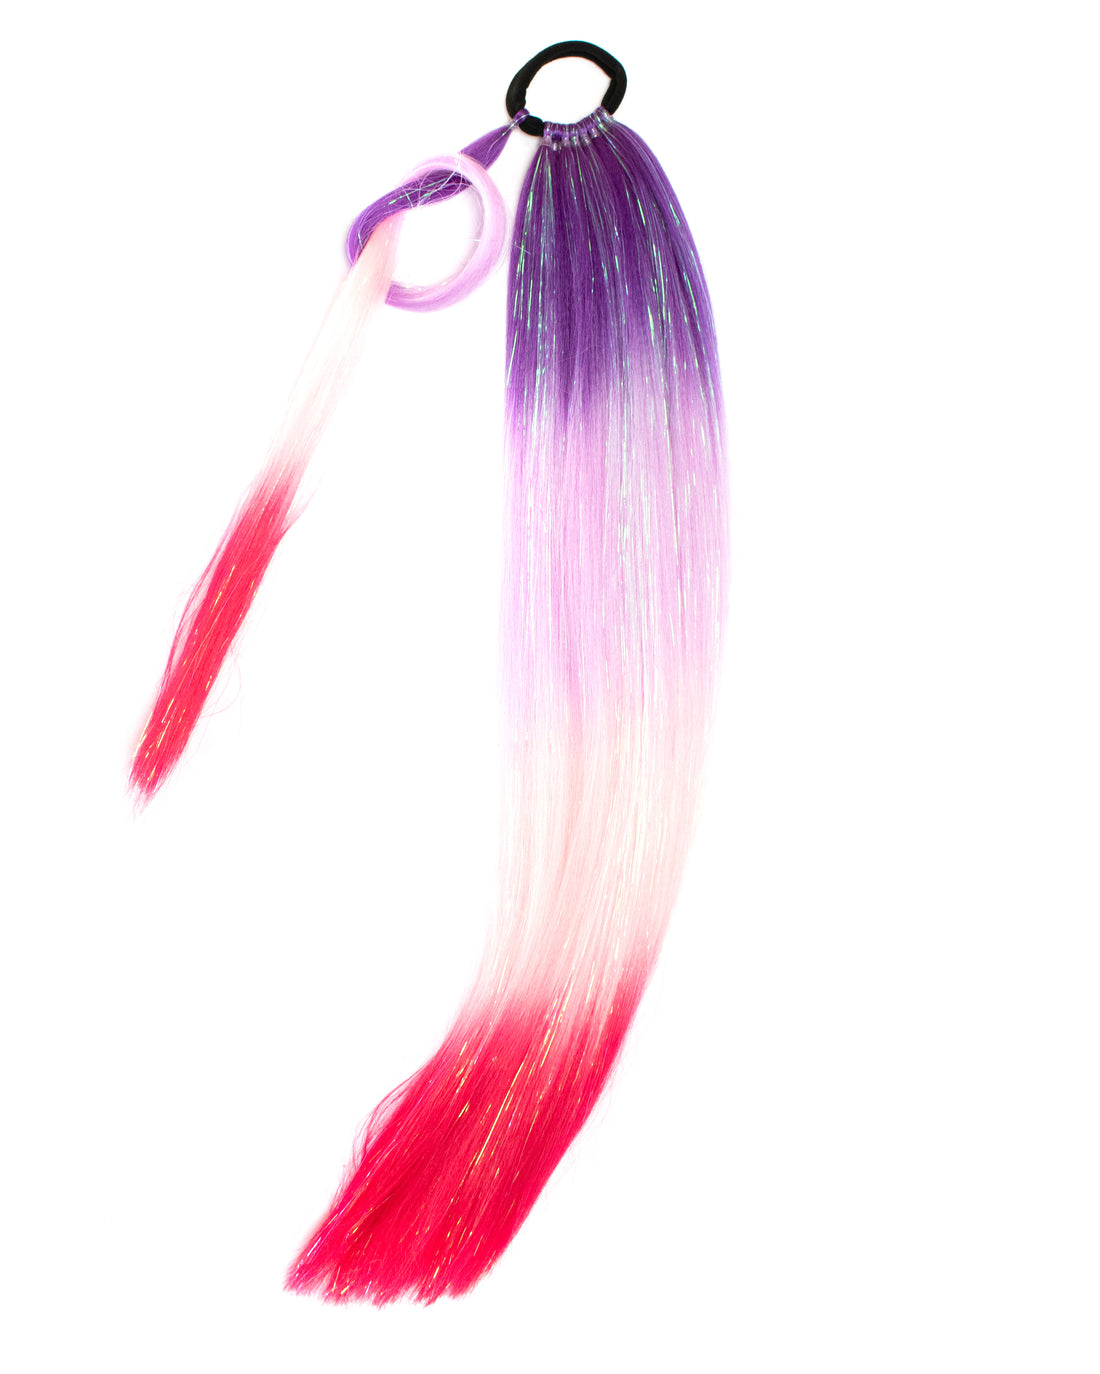 Sunrise - Ombre Purple Pink Red Ponytail Extension with Tinsel - Lunautics Ponytail Hair Extension